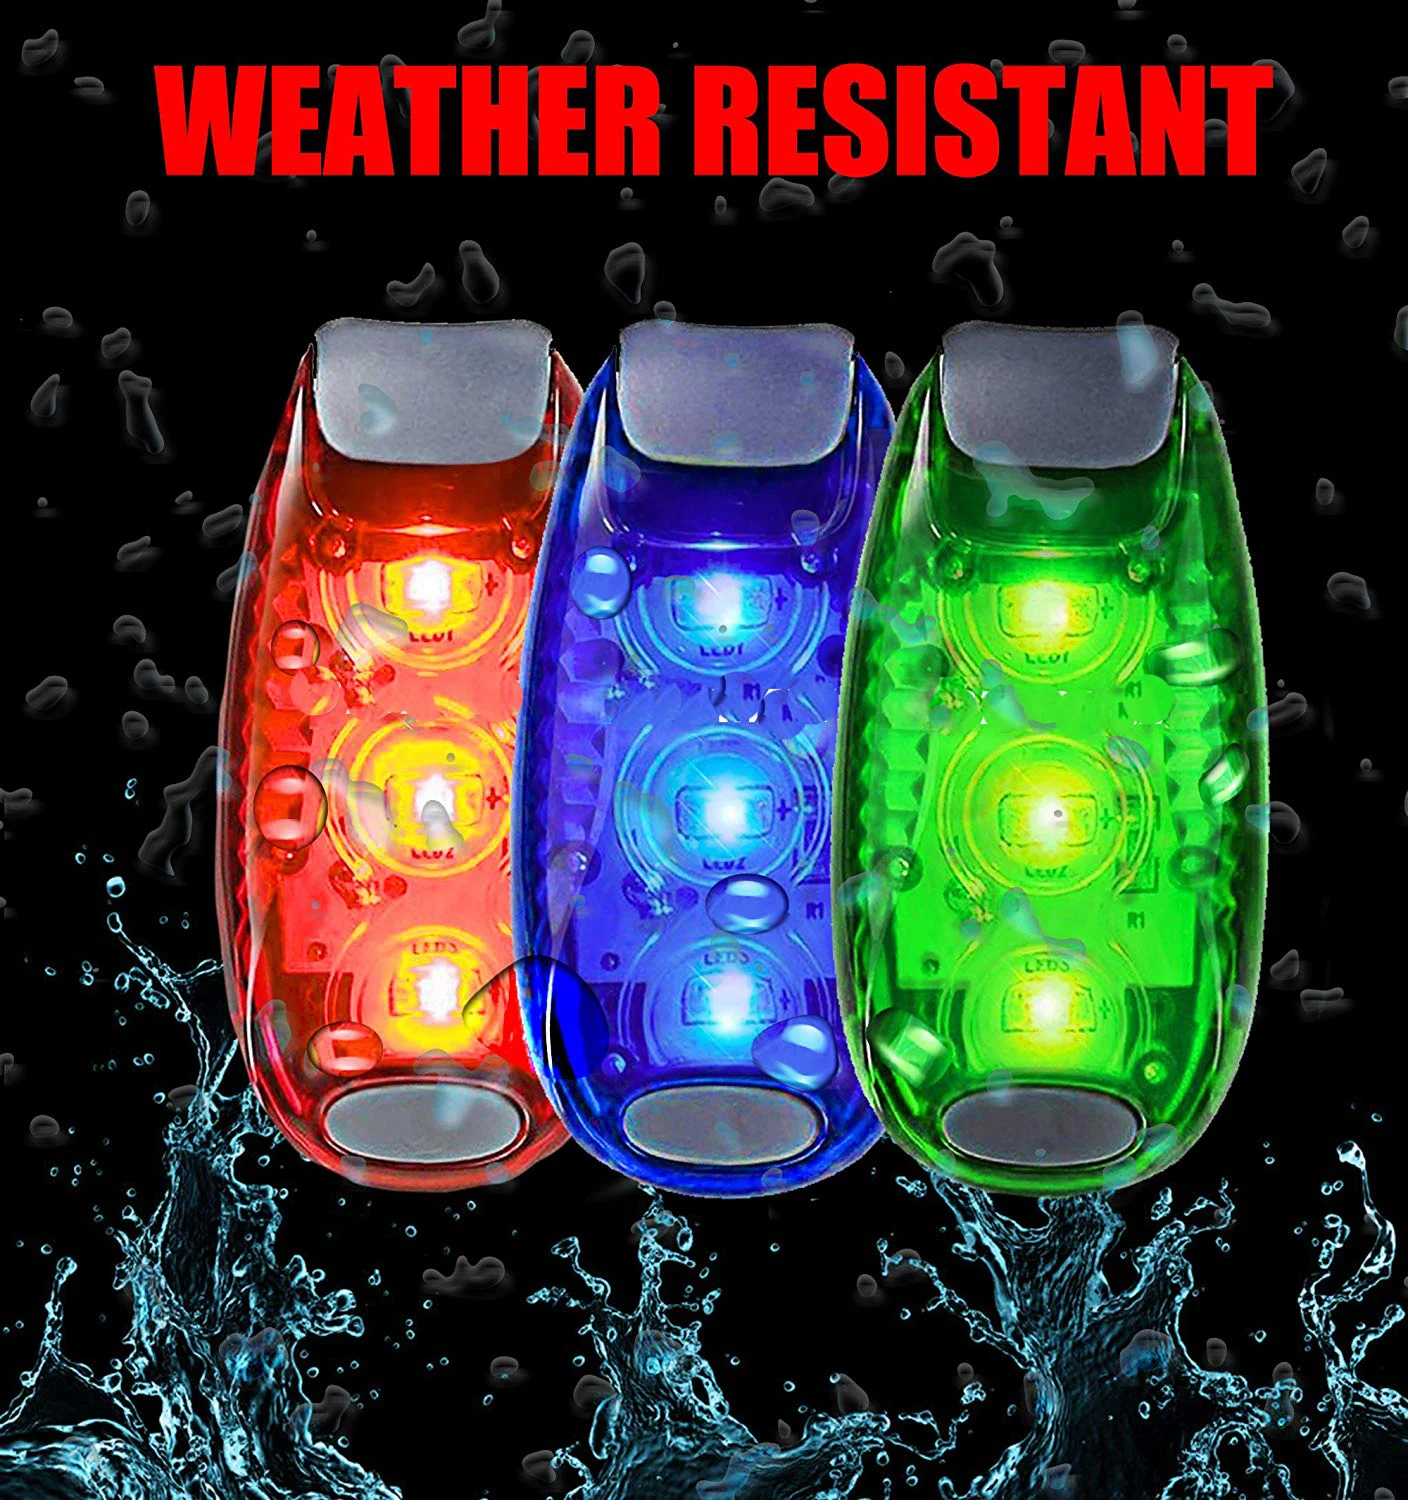 LED Night Safety Light Clip On Strobe Running Lights For Cycling